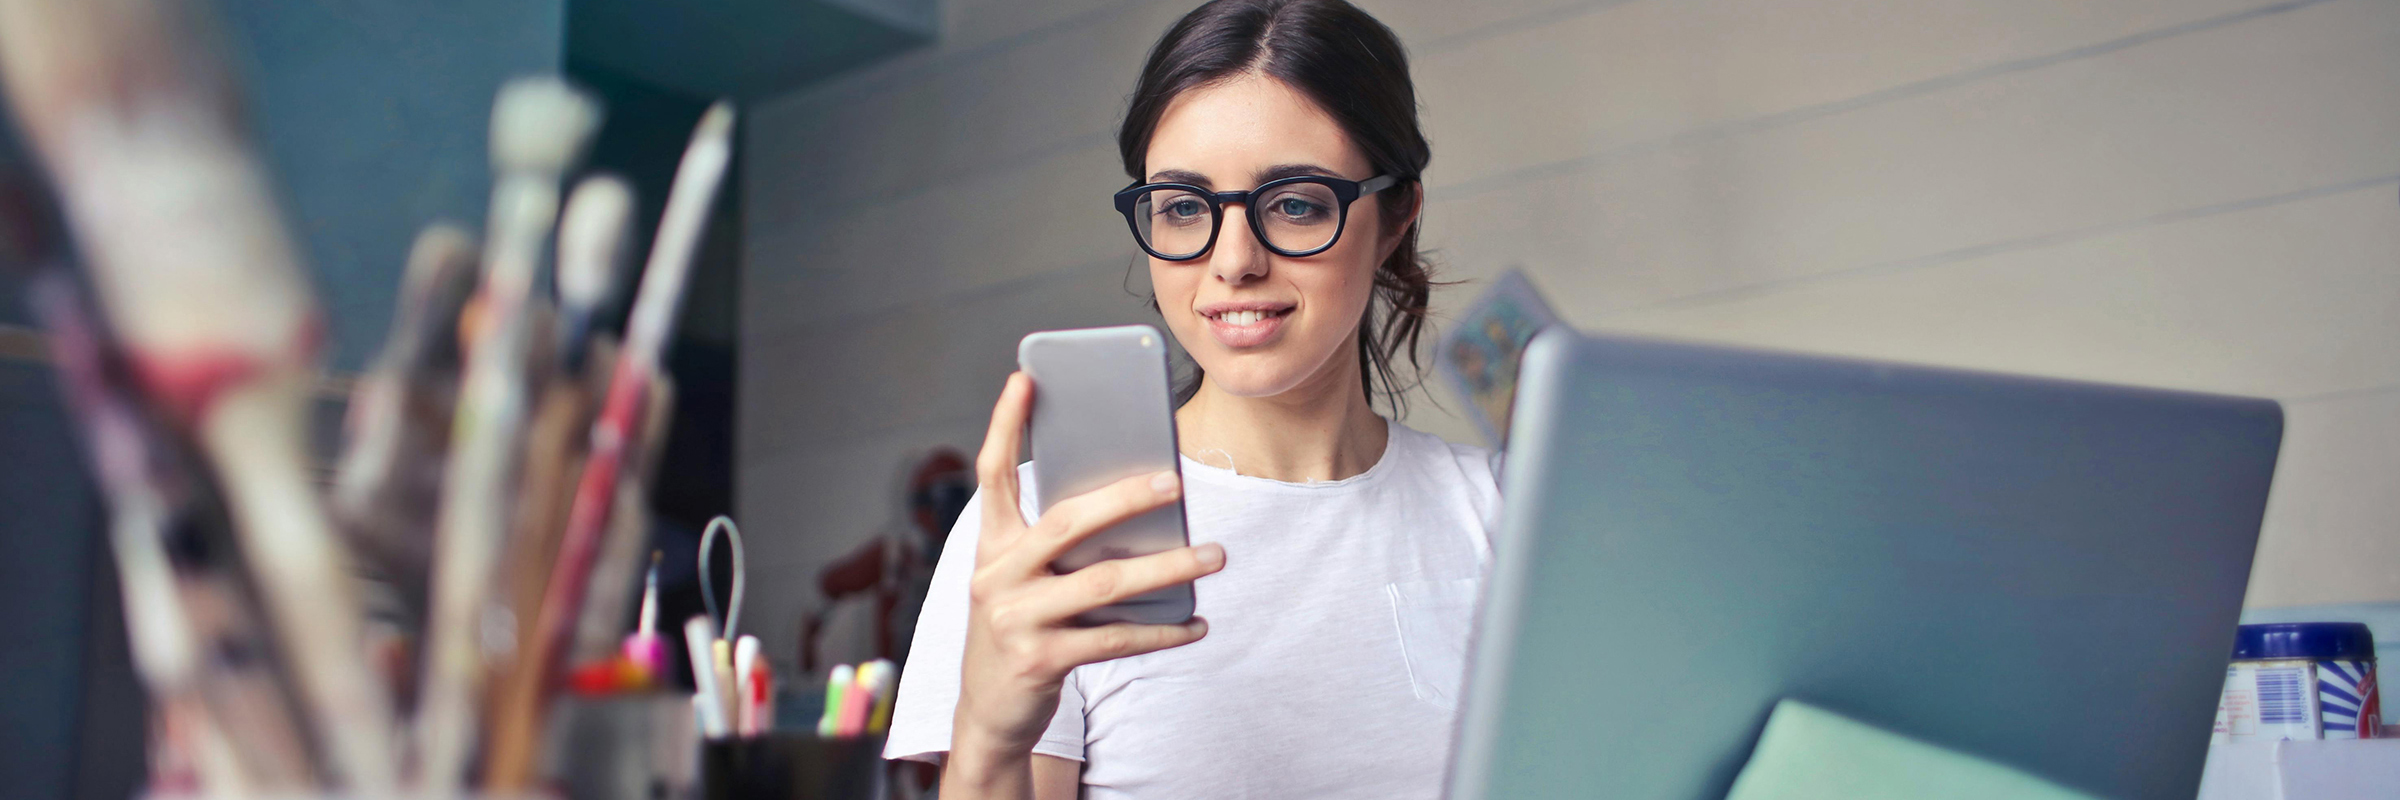 young white woman looking at smartphone while at desk